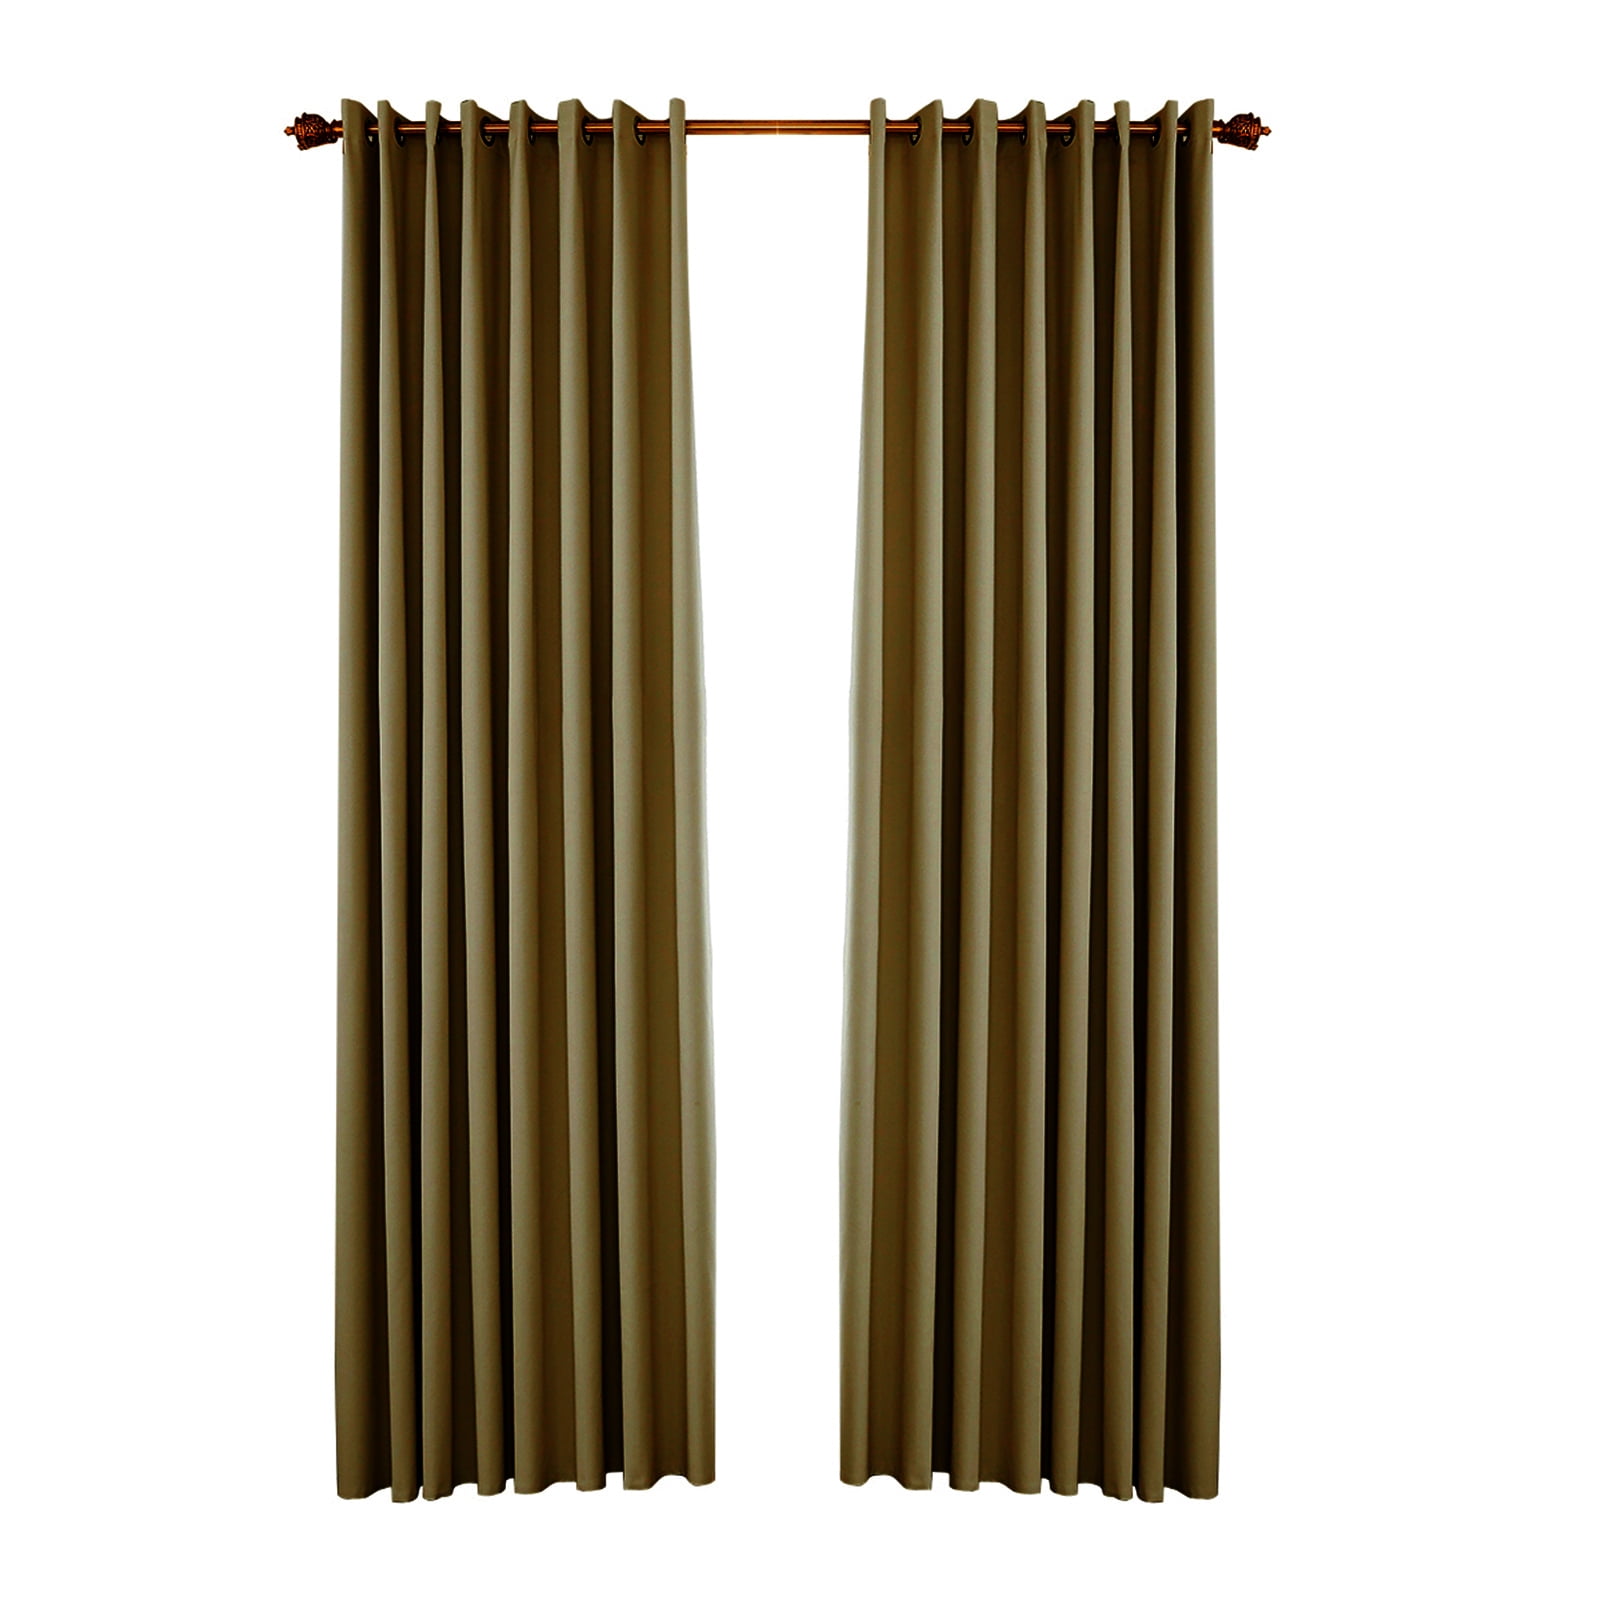 2 Panels Sunlight Block Grommet Thermal Insulated Blackout Curtains Privacy Protected Curtains for Outside Porch Pergola Cabana Bonlino Waterproof Outdoor Curtains for Patio Beige, 52x84 inches